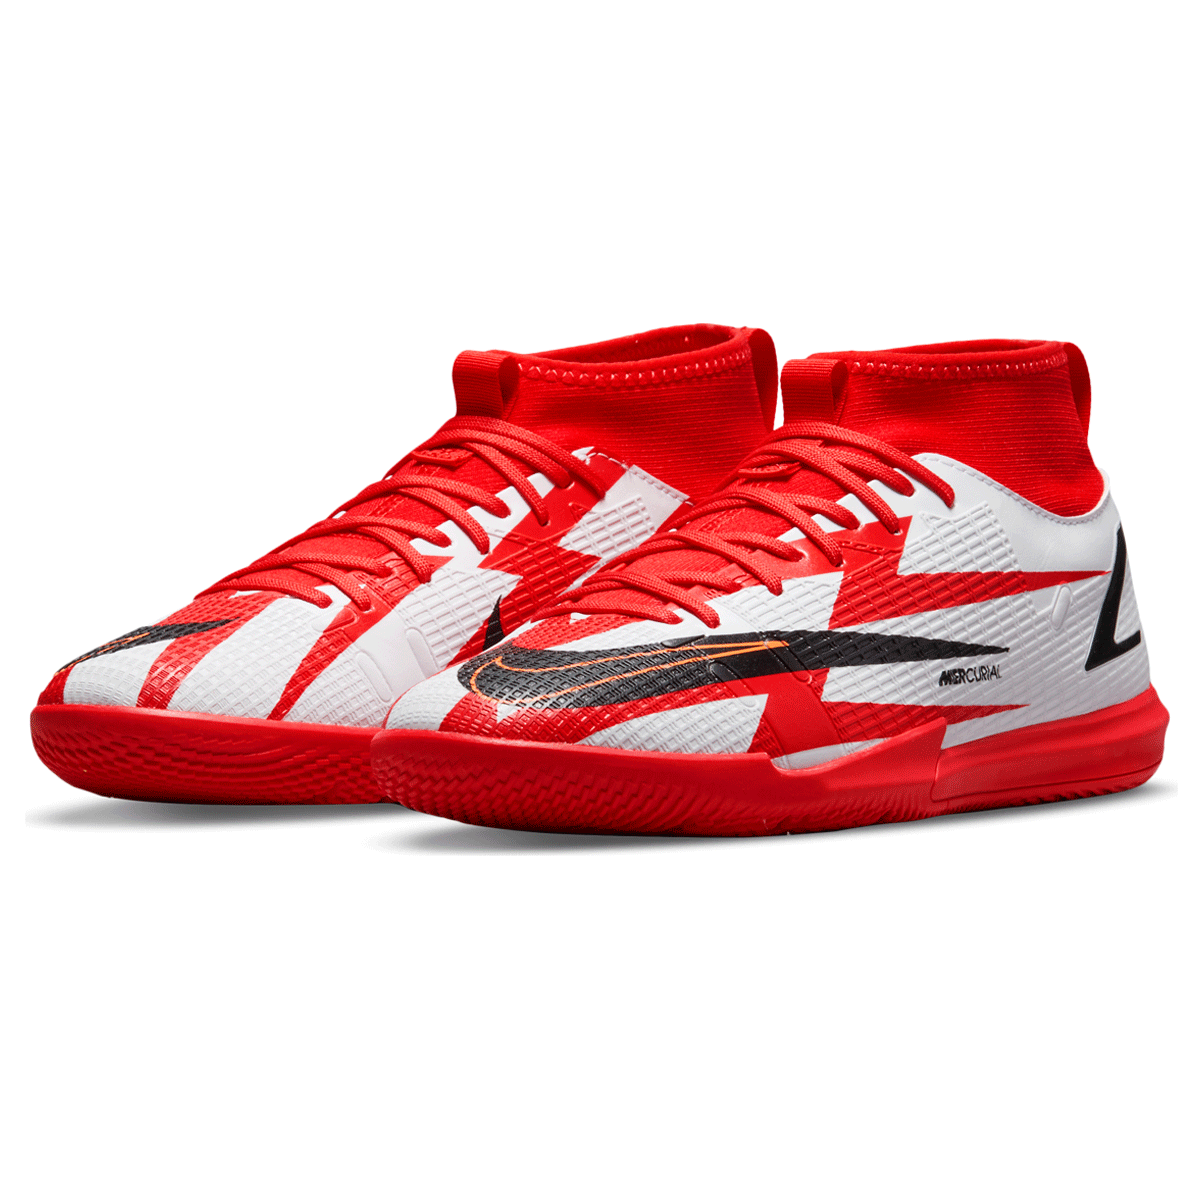 cr7 superfly indoor shoes